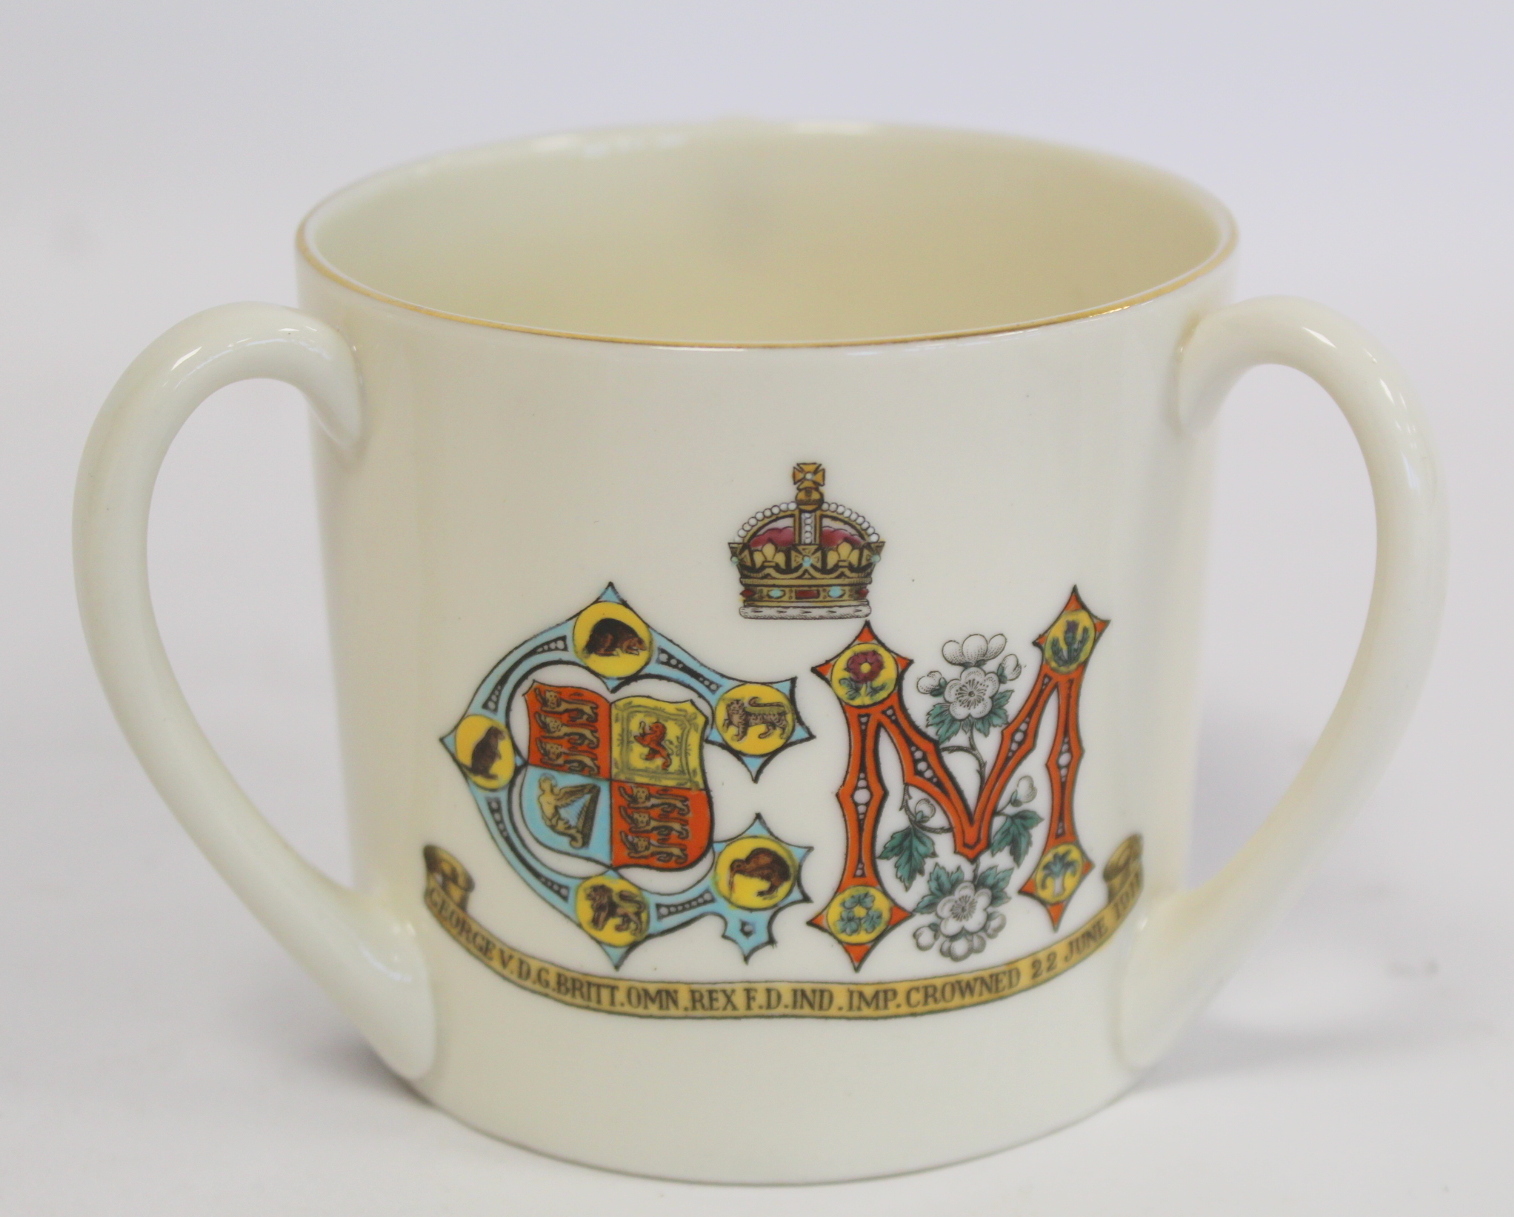 Four pieces of Goss commemorative ware for the Coronation of King George V and Queen Mary 1911, - Image 11 of 12